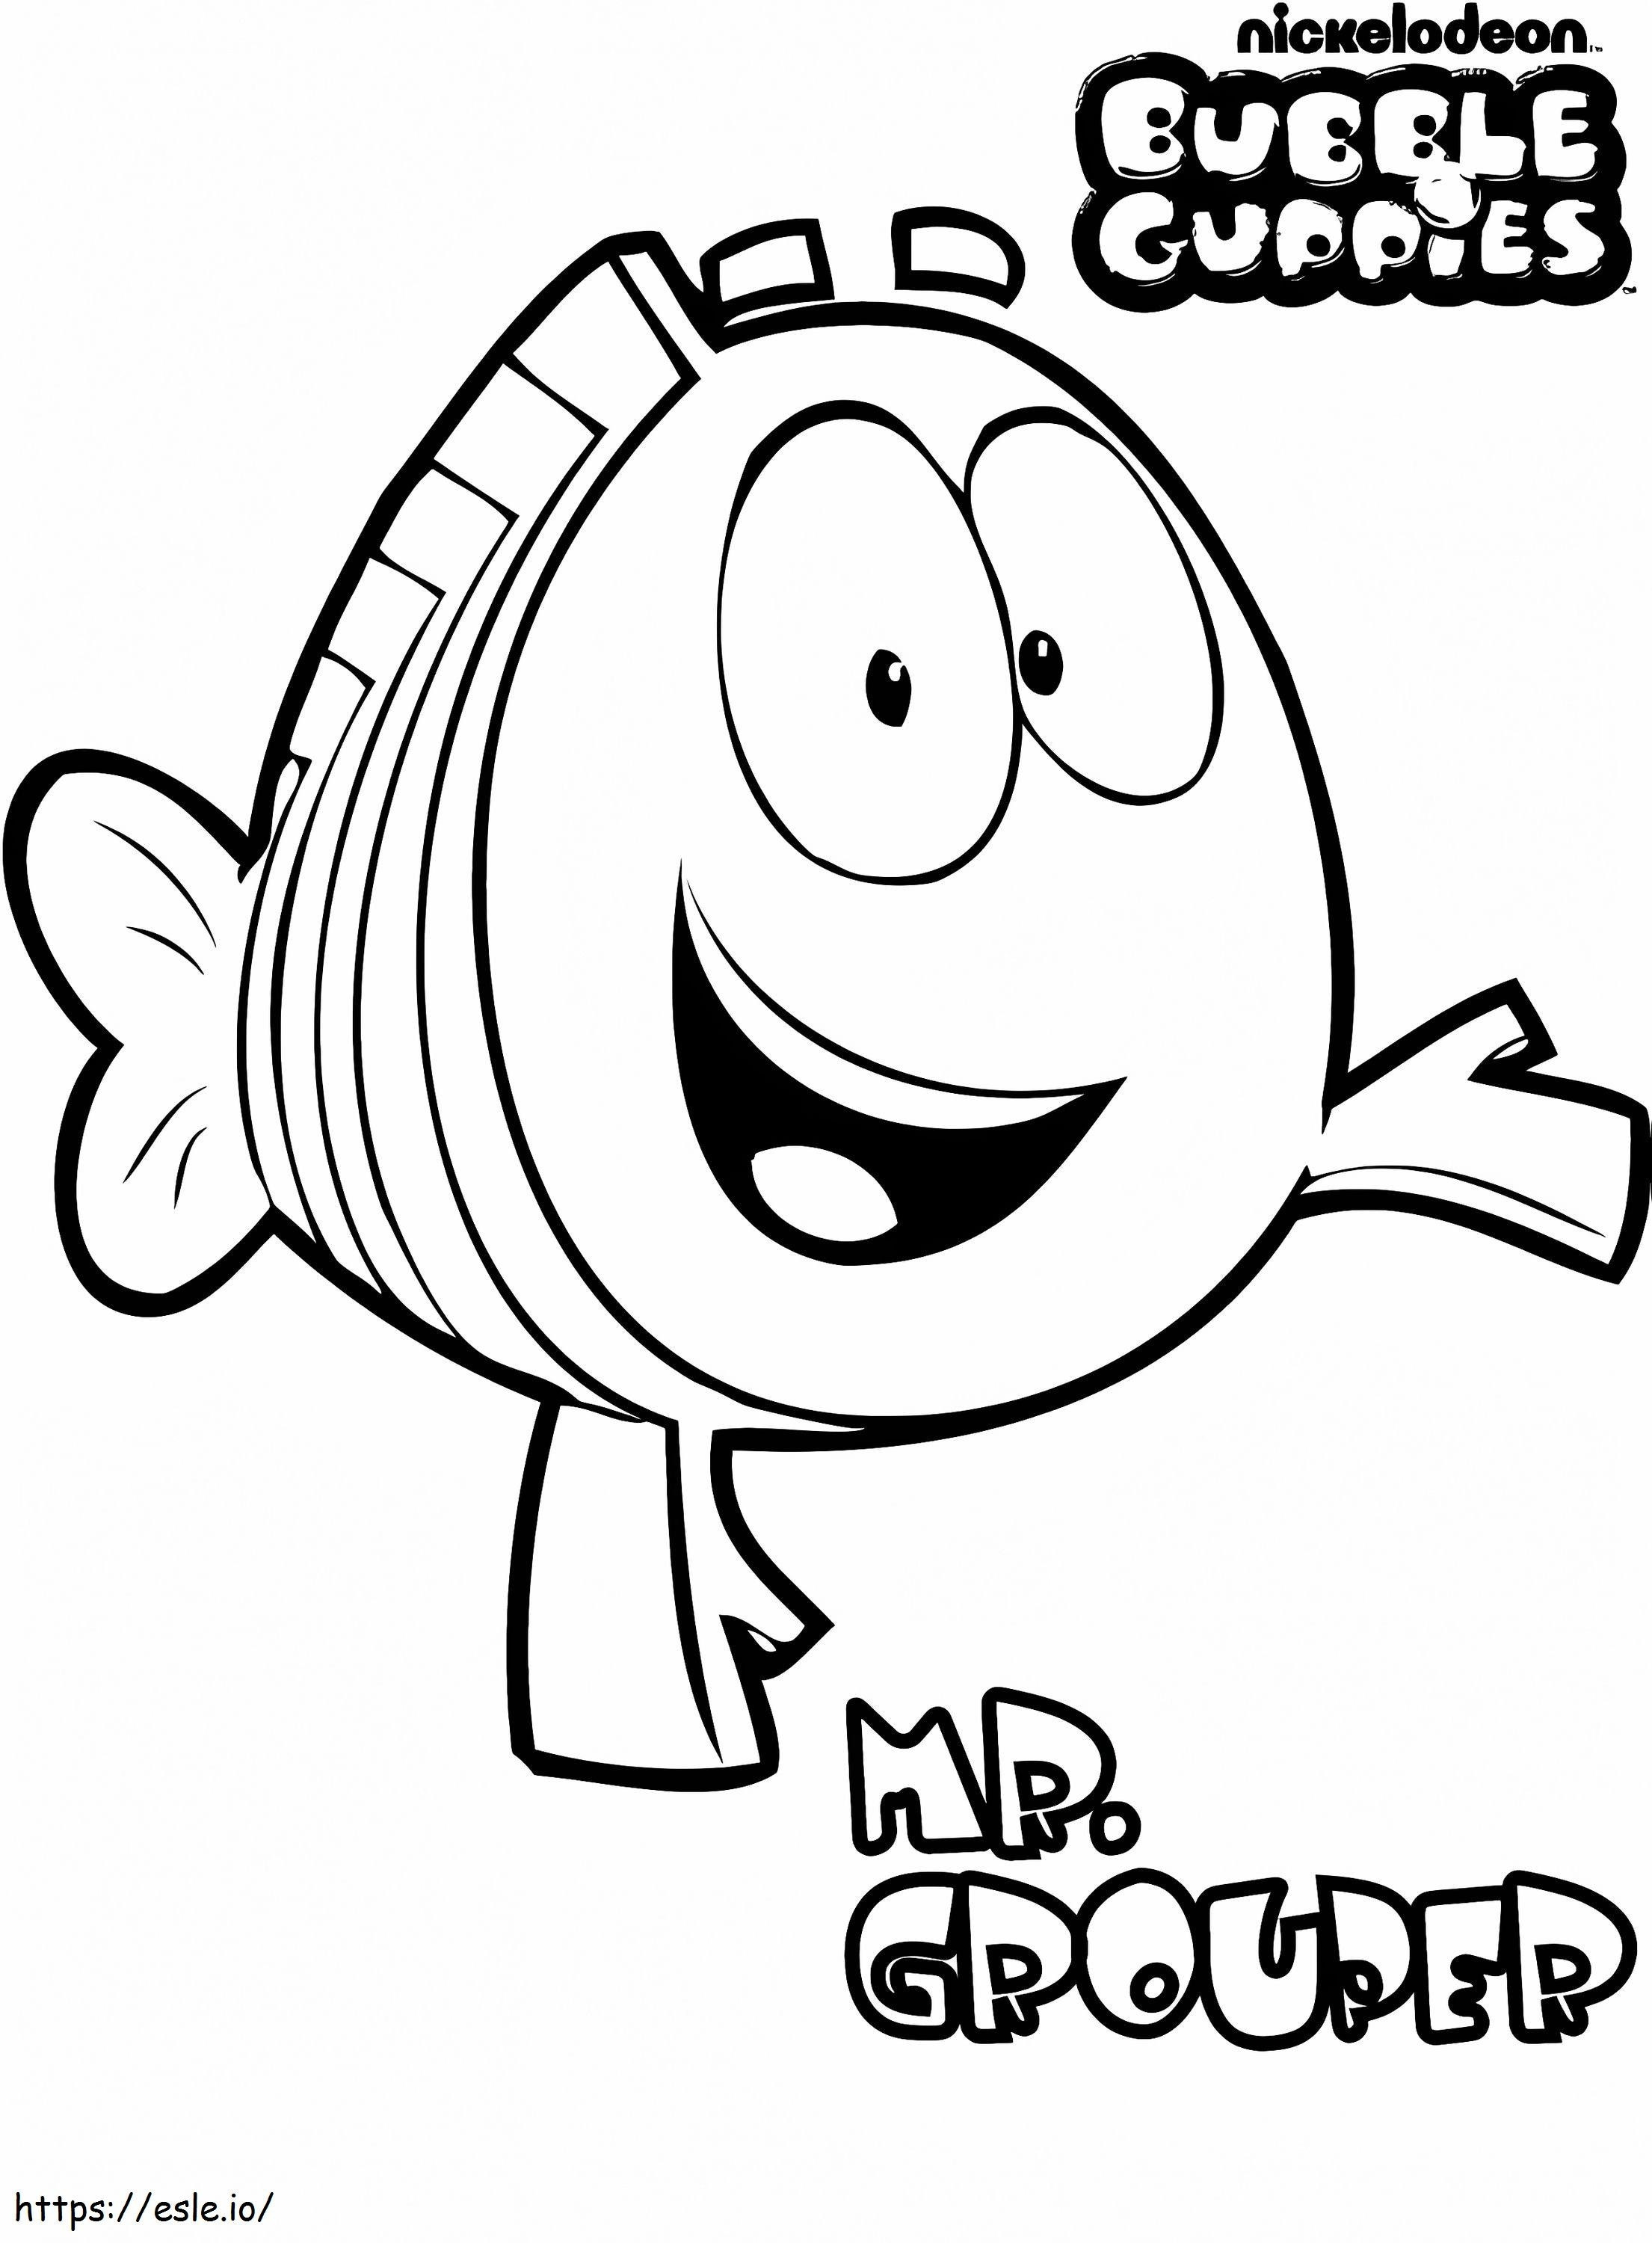 Mr. Grouper coloring page